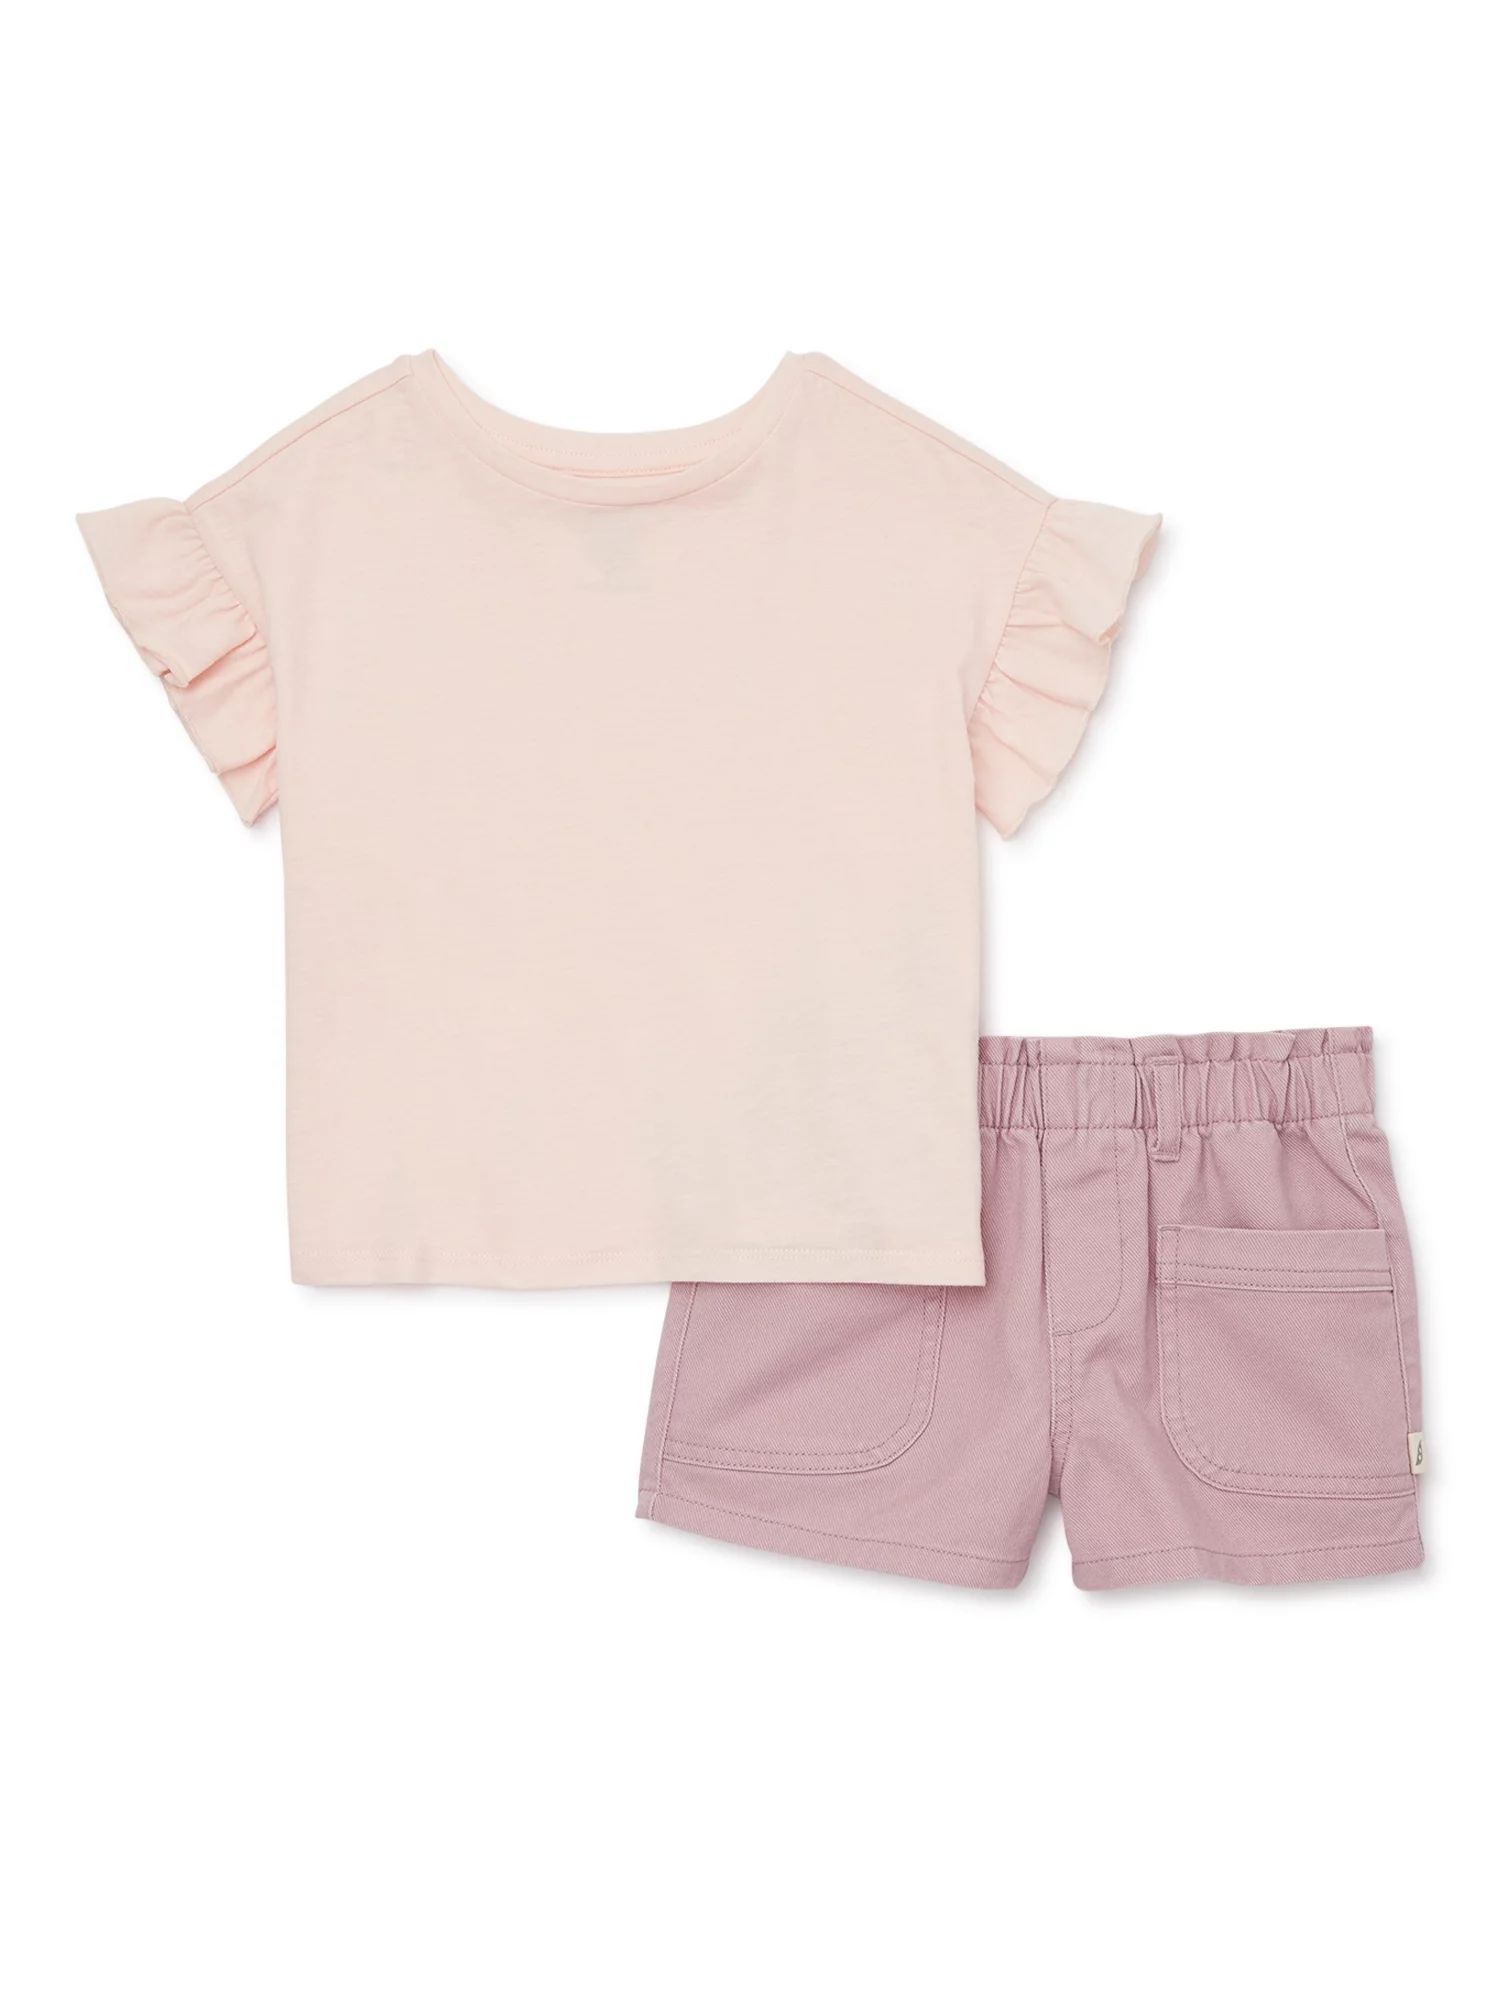 easy-peasy Baby and Toddler Girls Ruffle Tee and Shorts Set, 2-Piece, Sizes 12M-5T | Walmart (US)